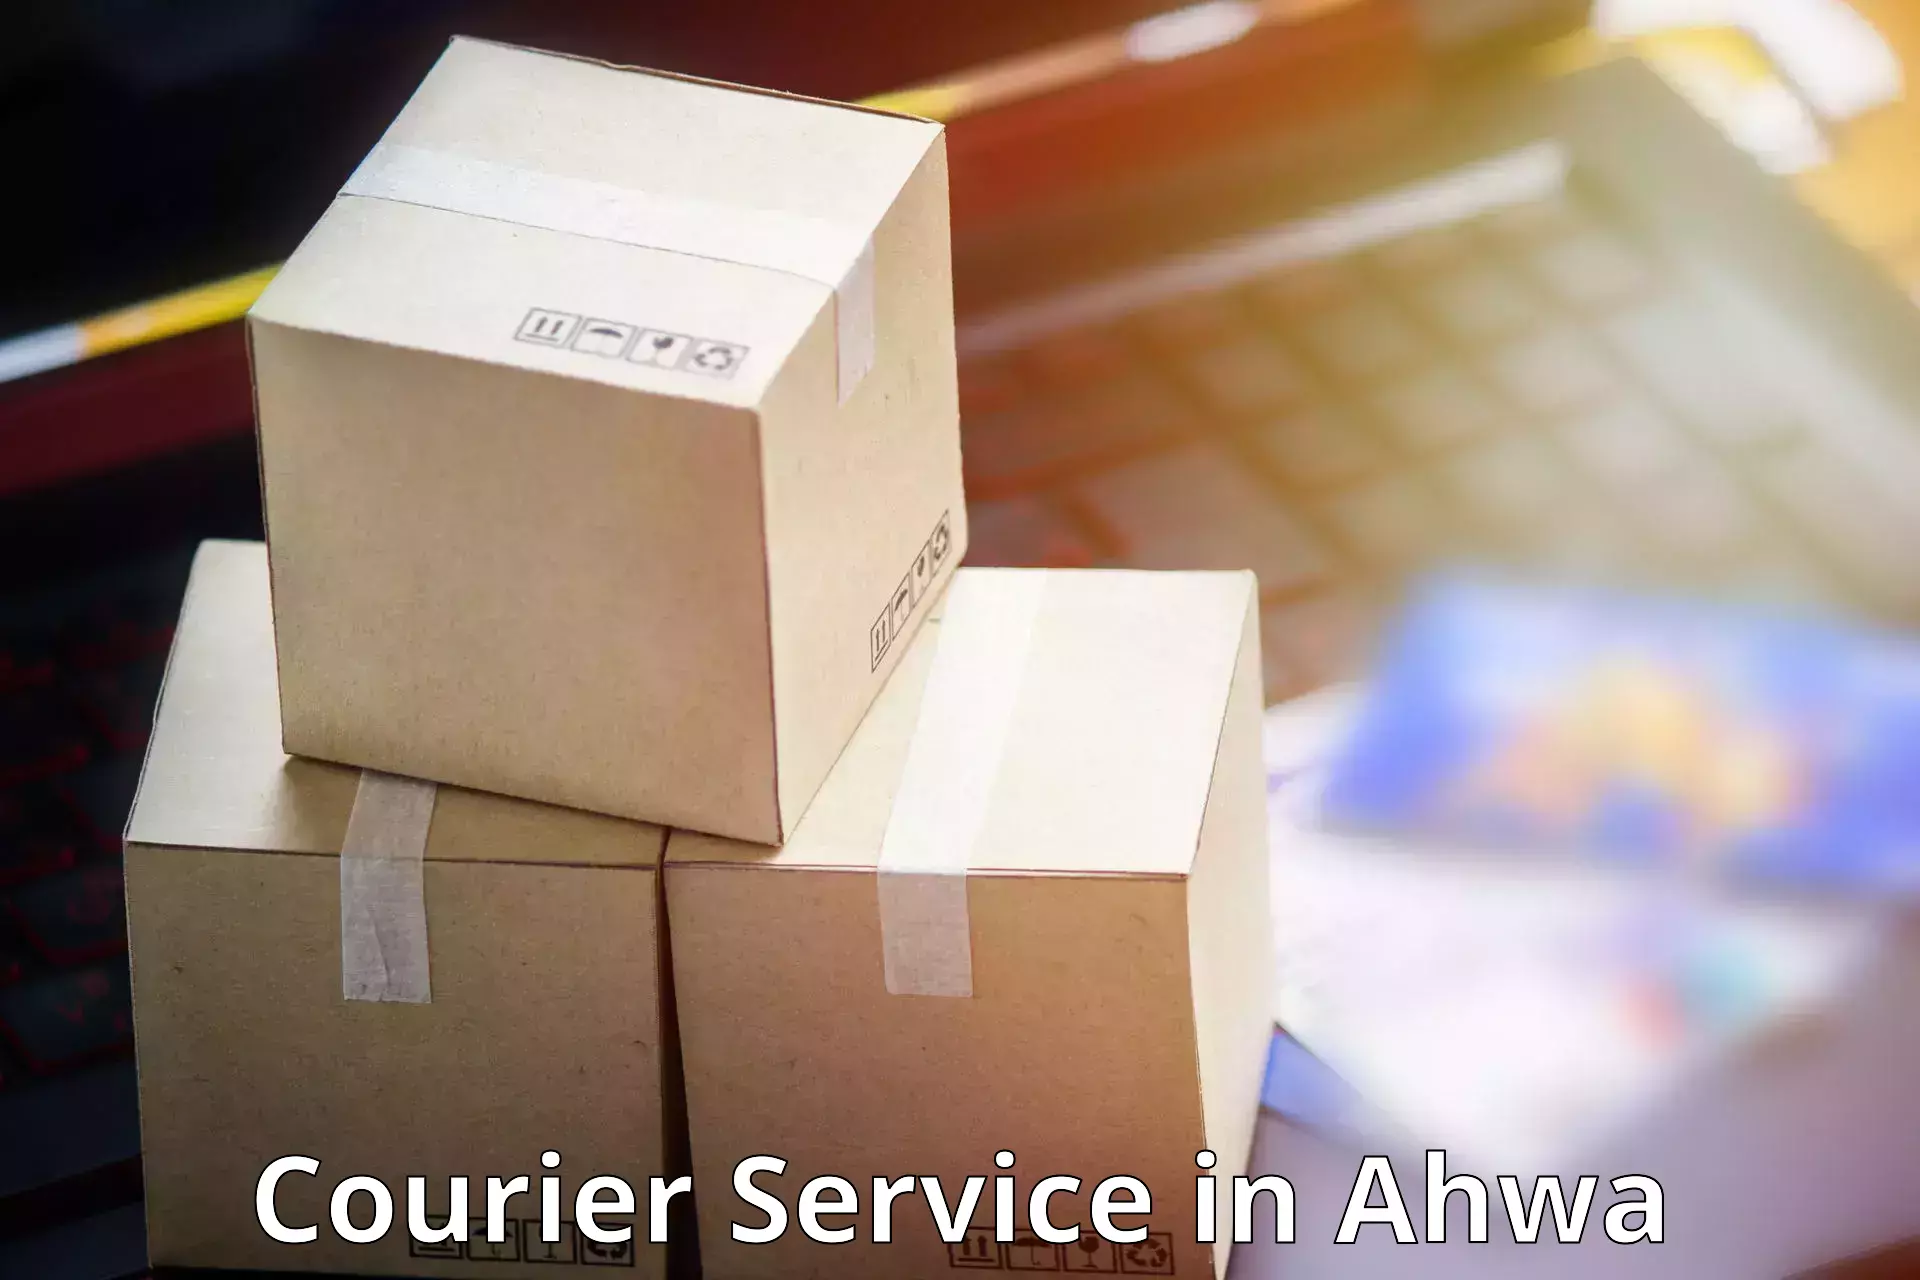 End-to-end delivery in Ahwa